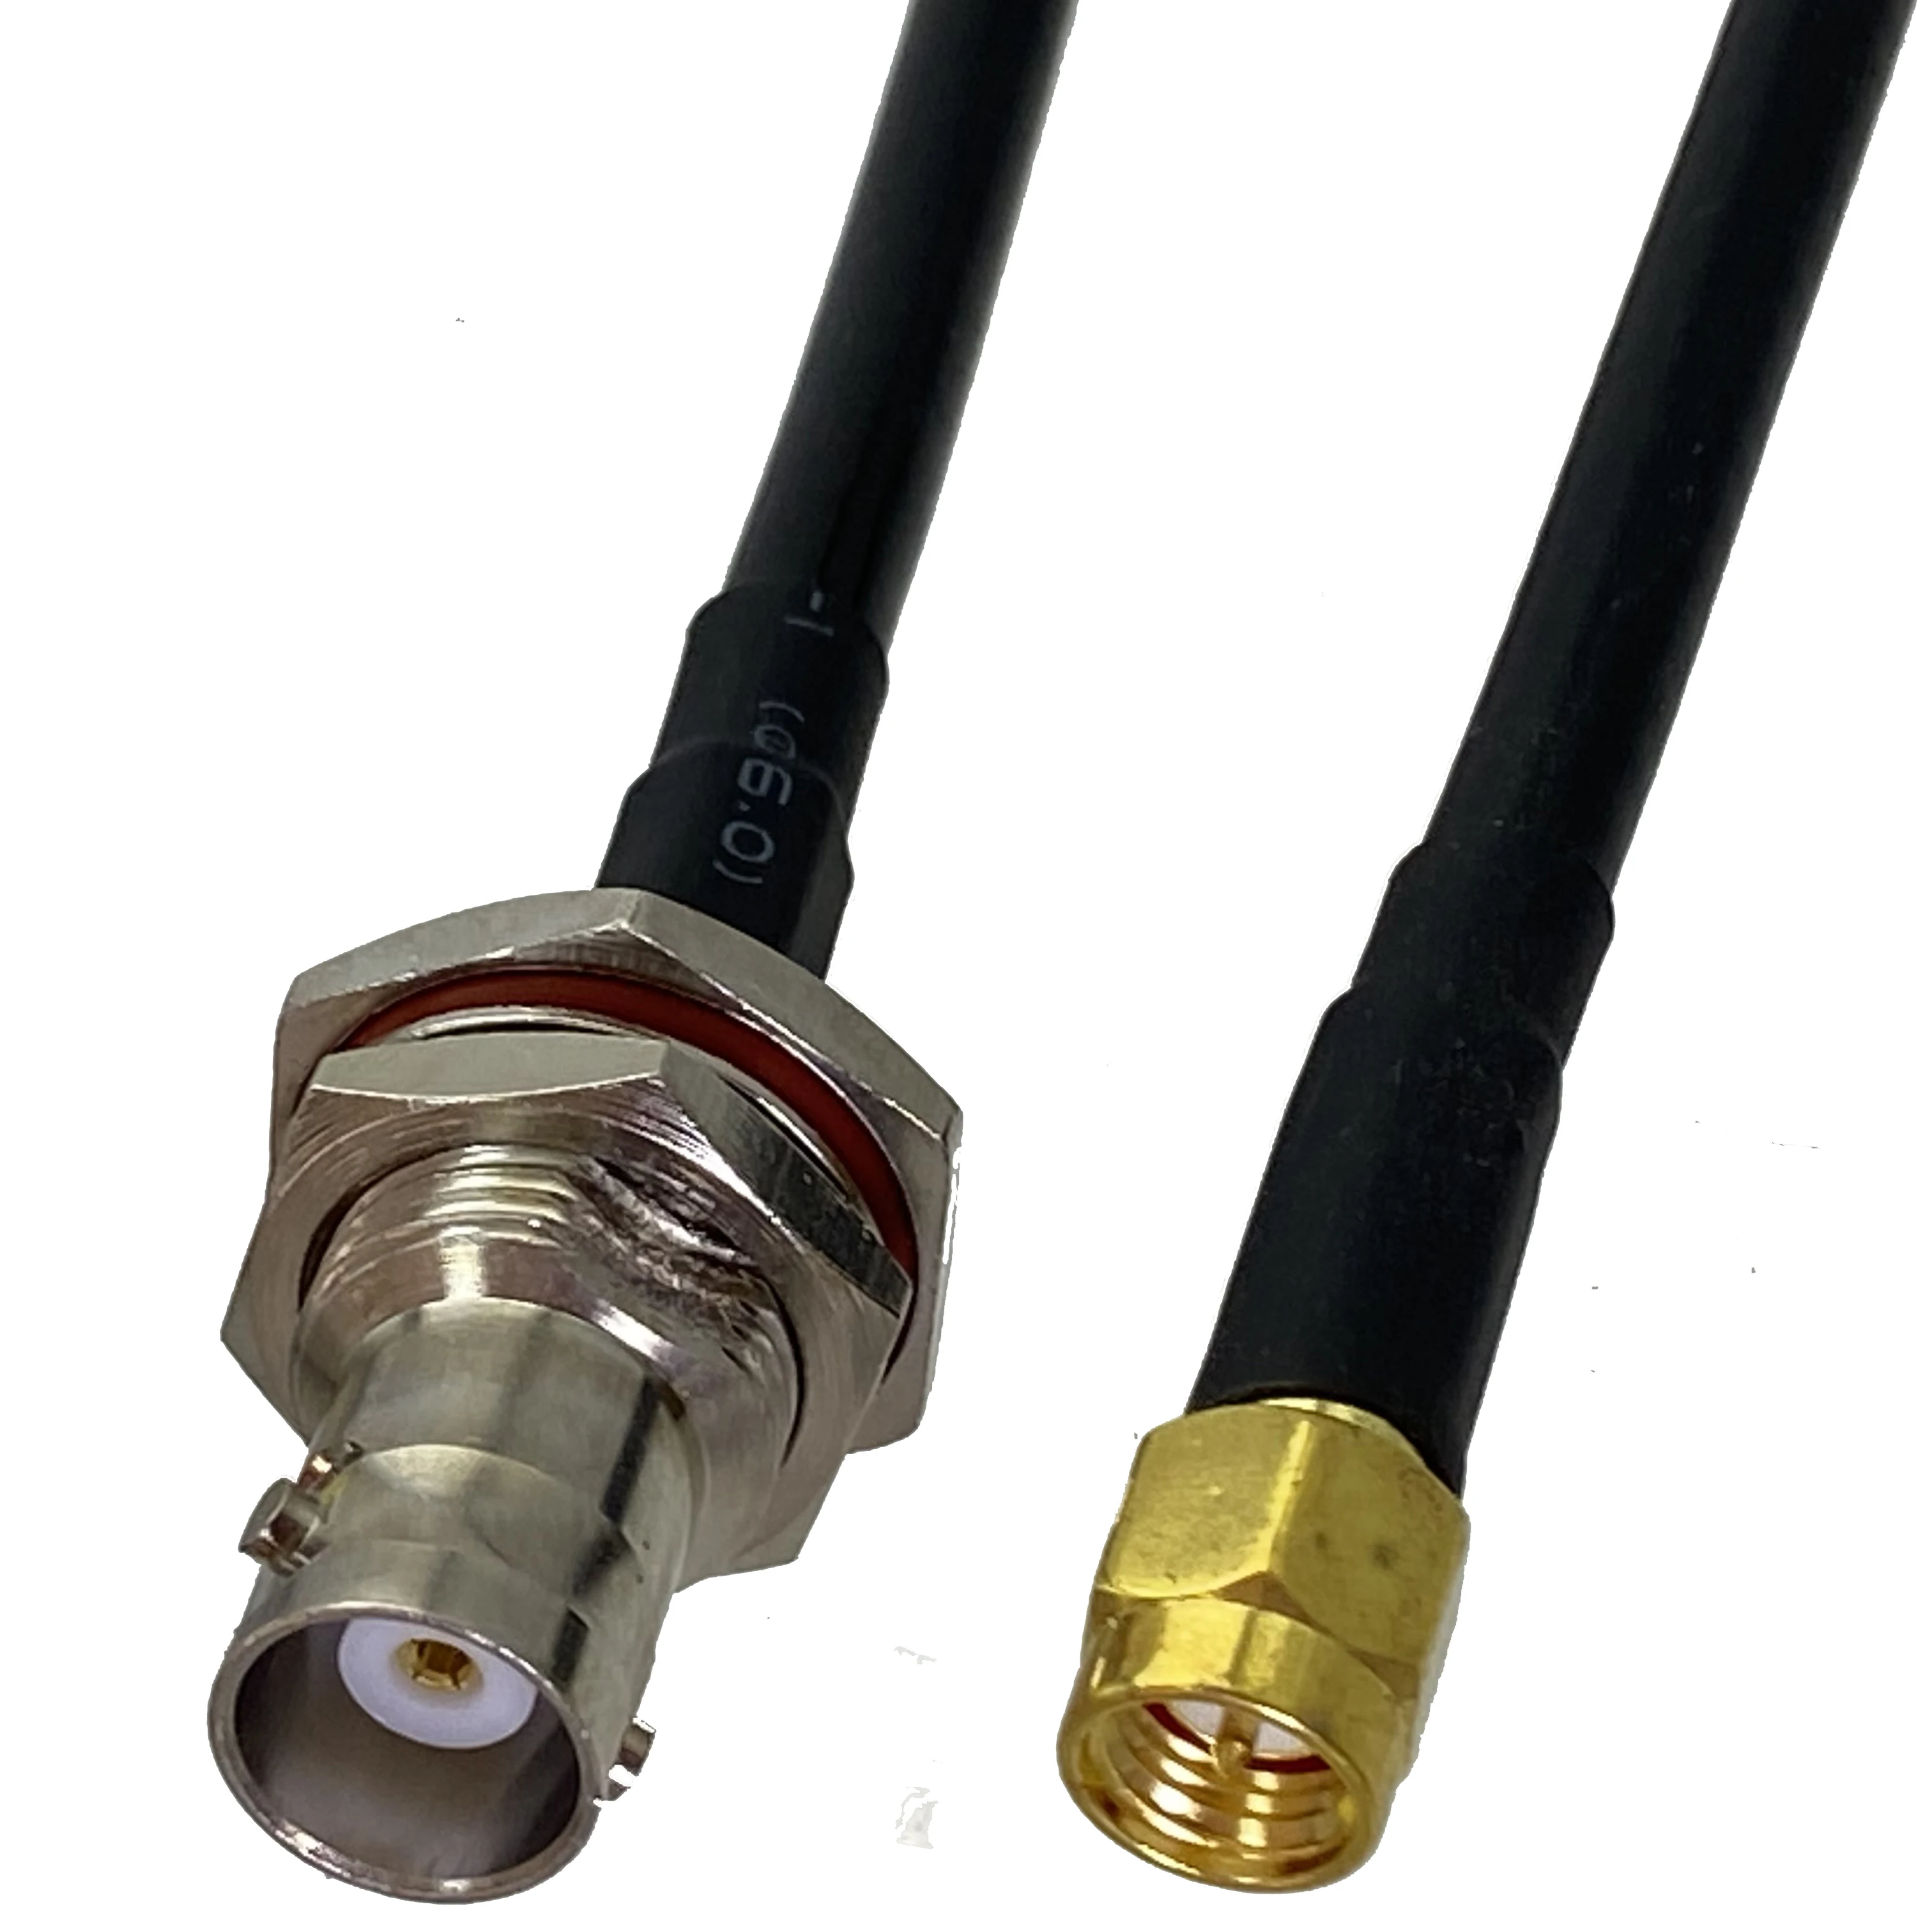 

1pcs RG58 SMA Male Plug to BNC Female Jack Bulkhead RF Coaxial Connector Pigtail Jumper Cable New 6inch~5M